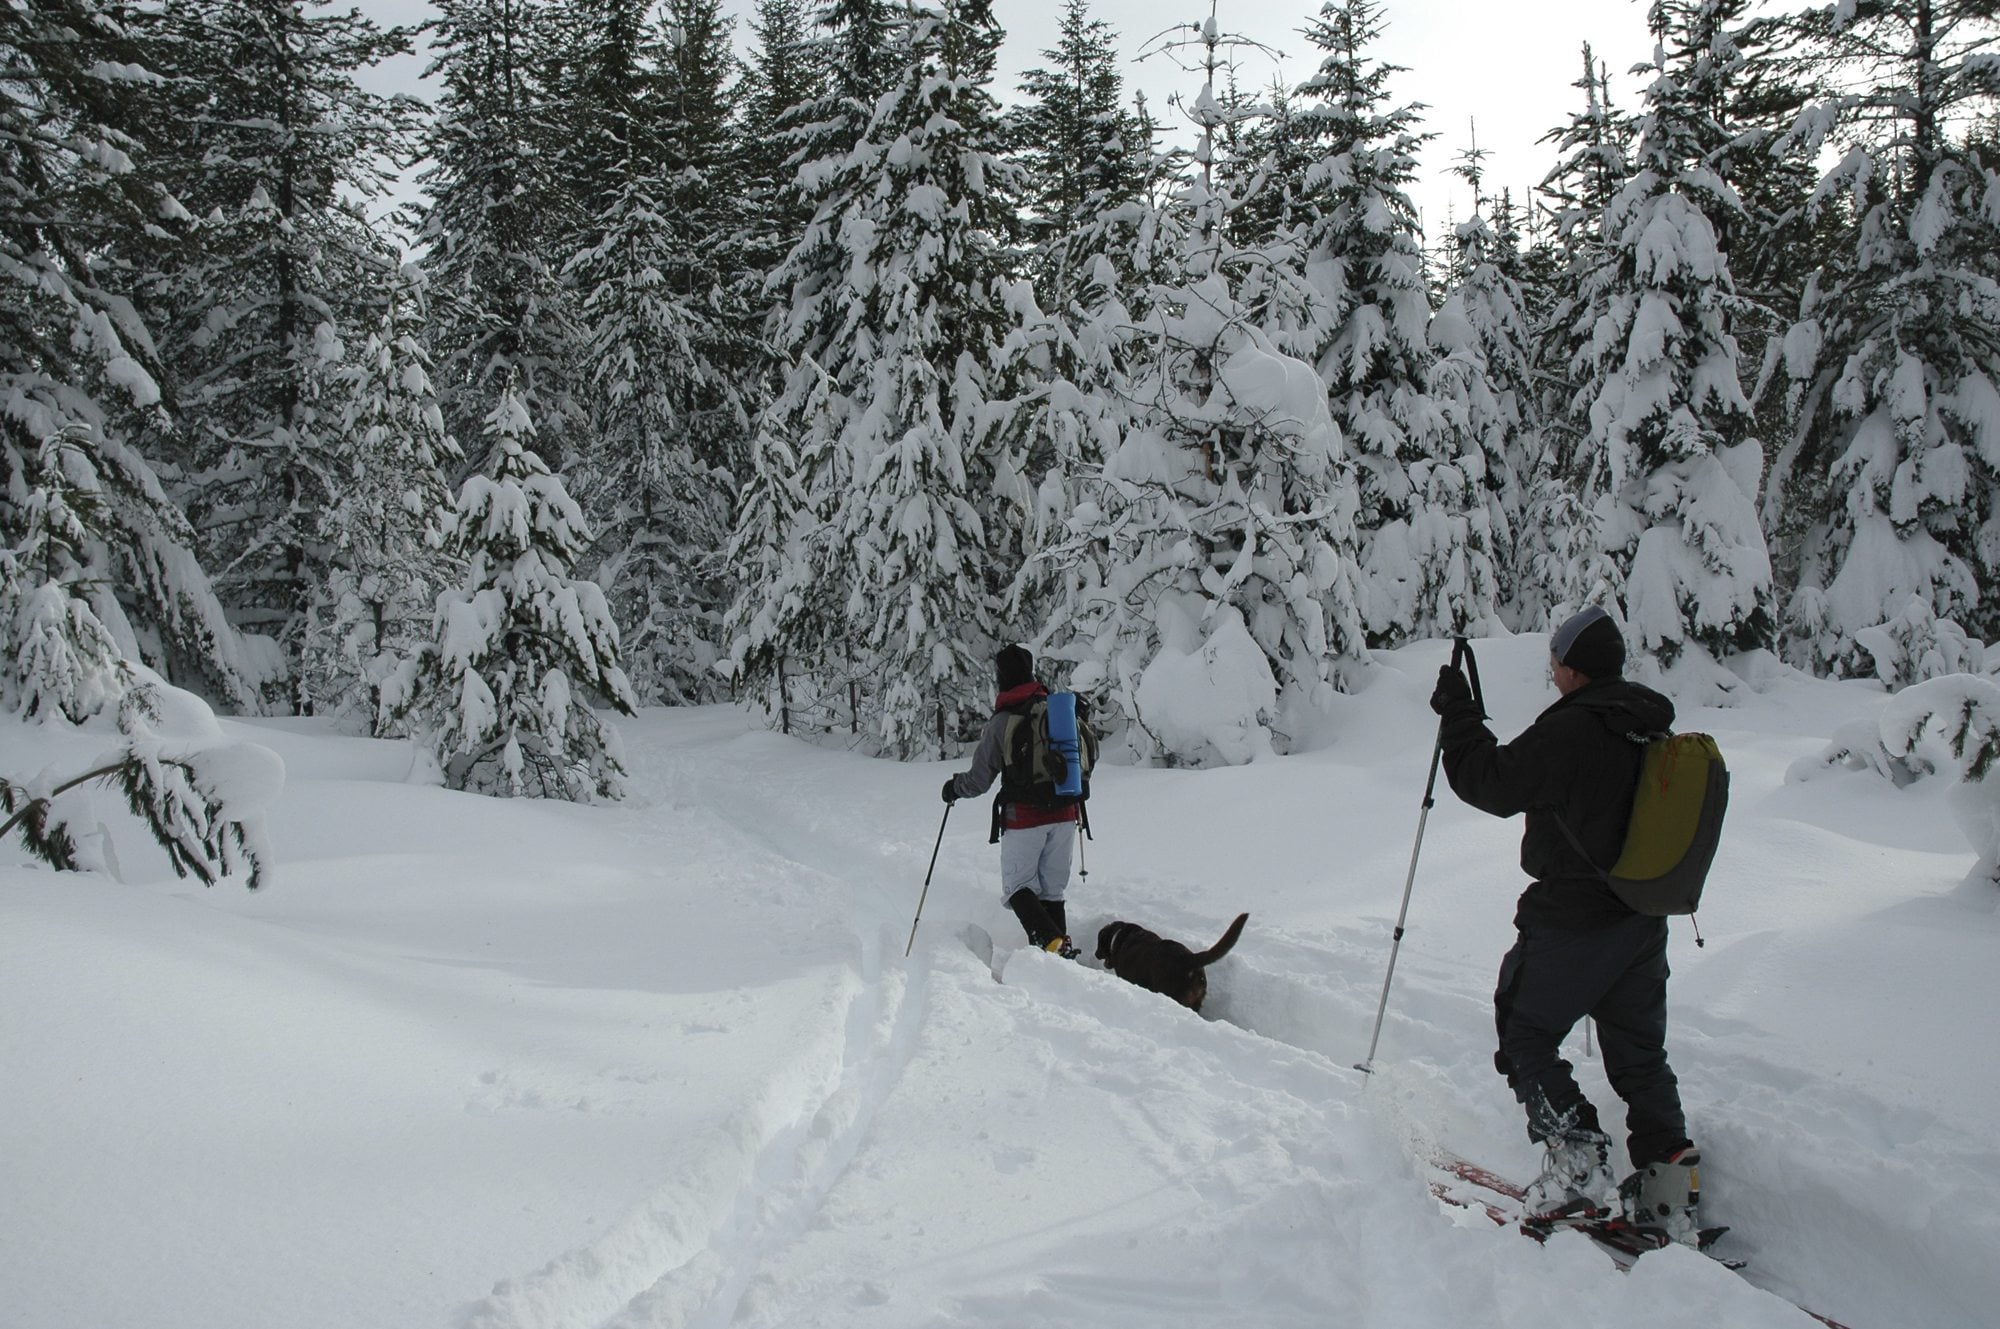 Cross-country skiers will find about 4 feet of snow on the trails at the headwaters of the Wind River.